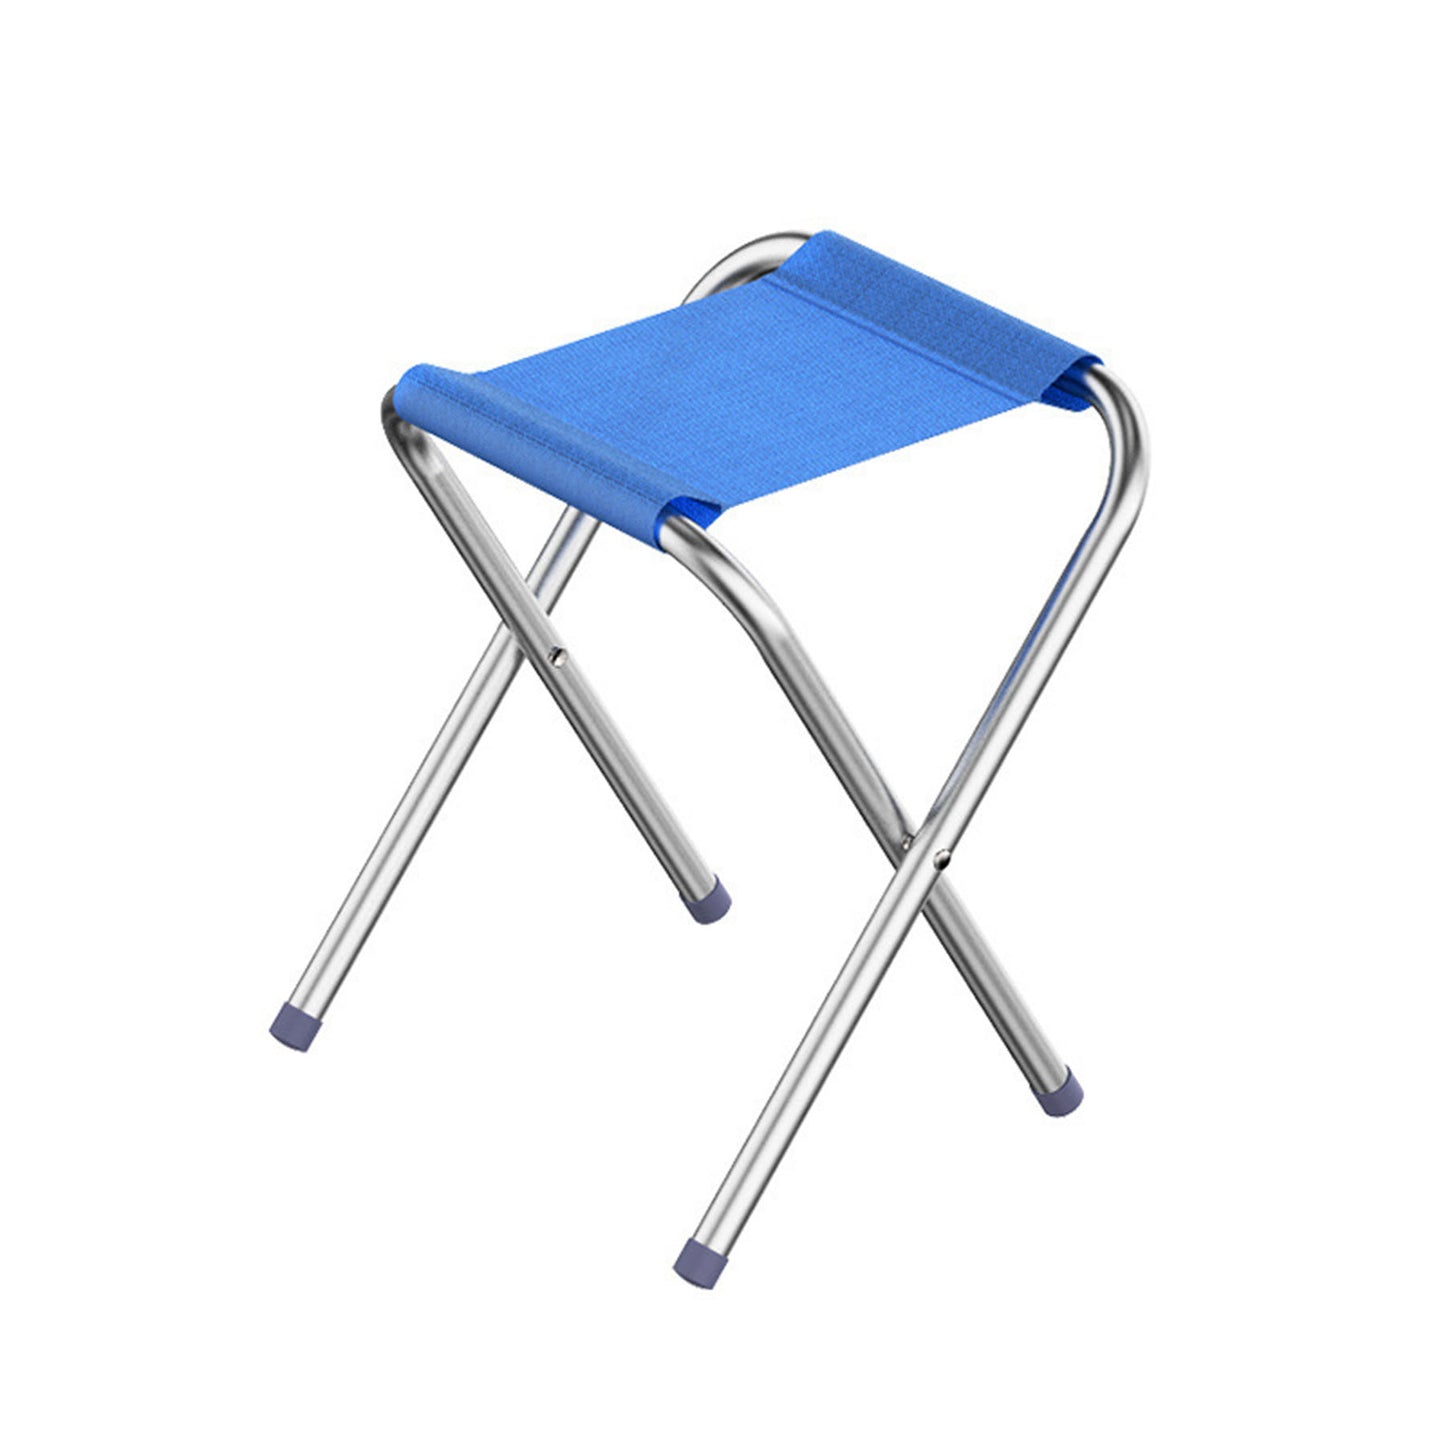 Folding table+6 chairs